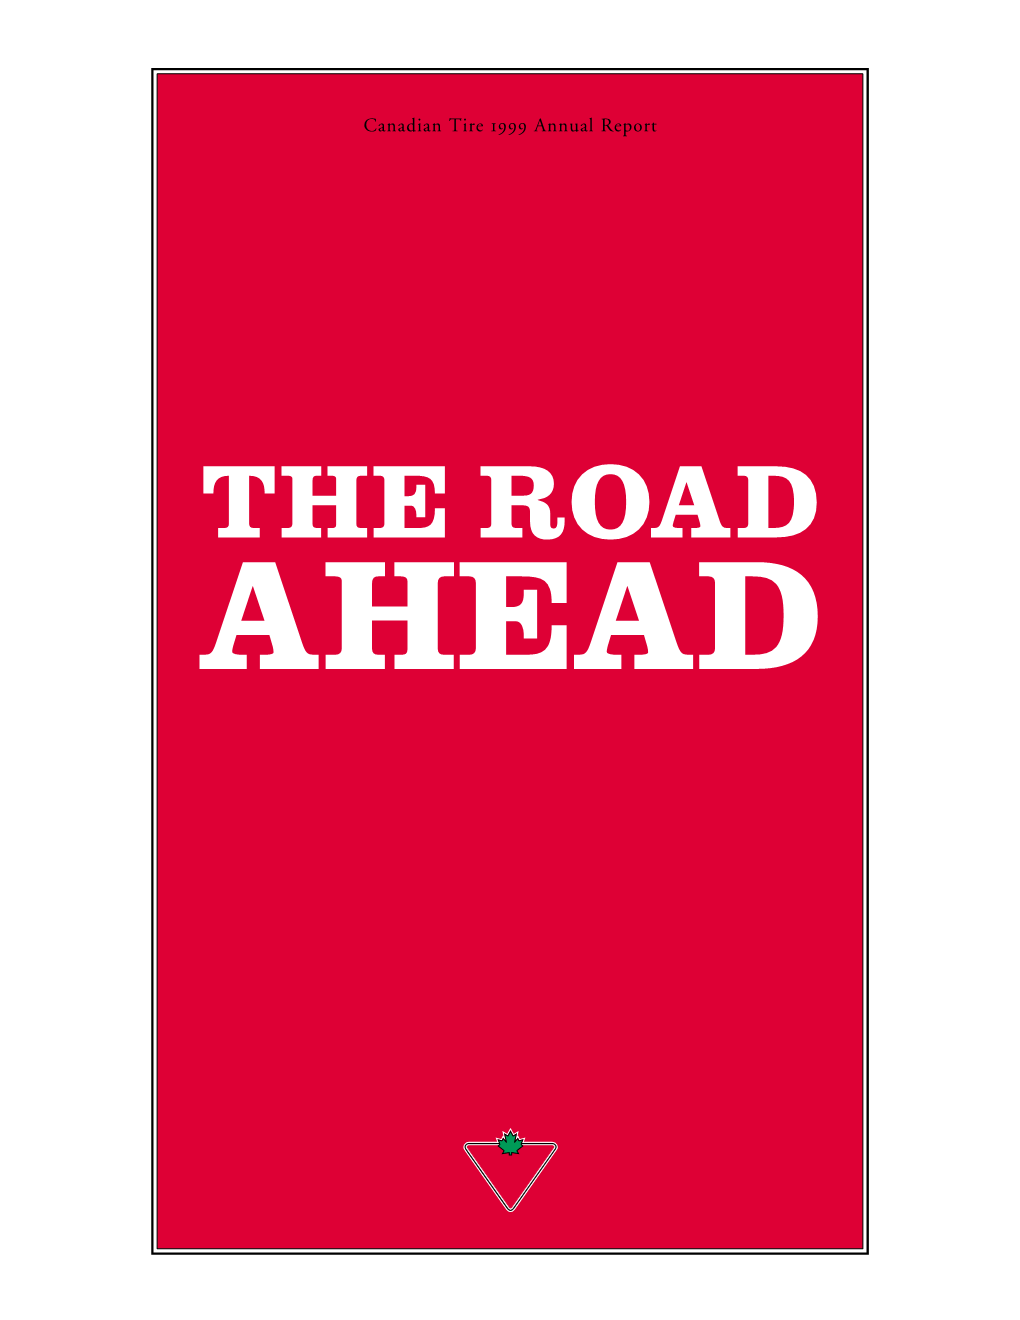 The Road Ahead Canadian Tire Corporation, Limited